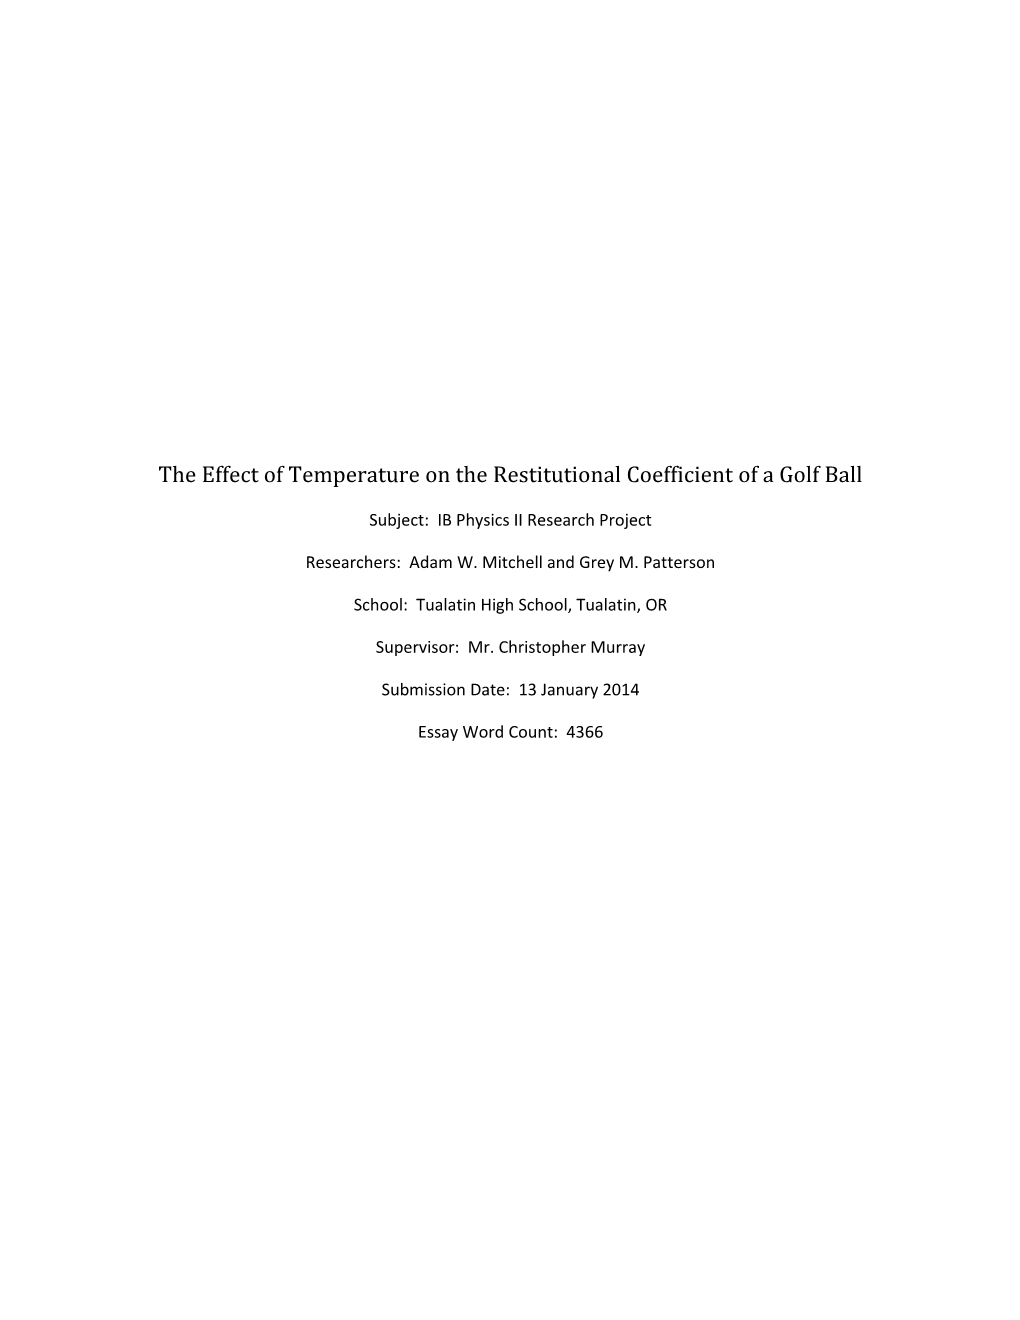 The Effect of Temperature on the Restitutional Coefficient of a Golf Ball